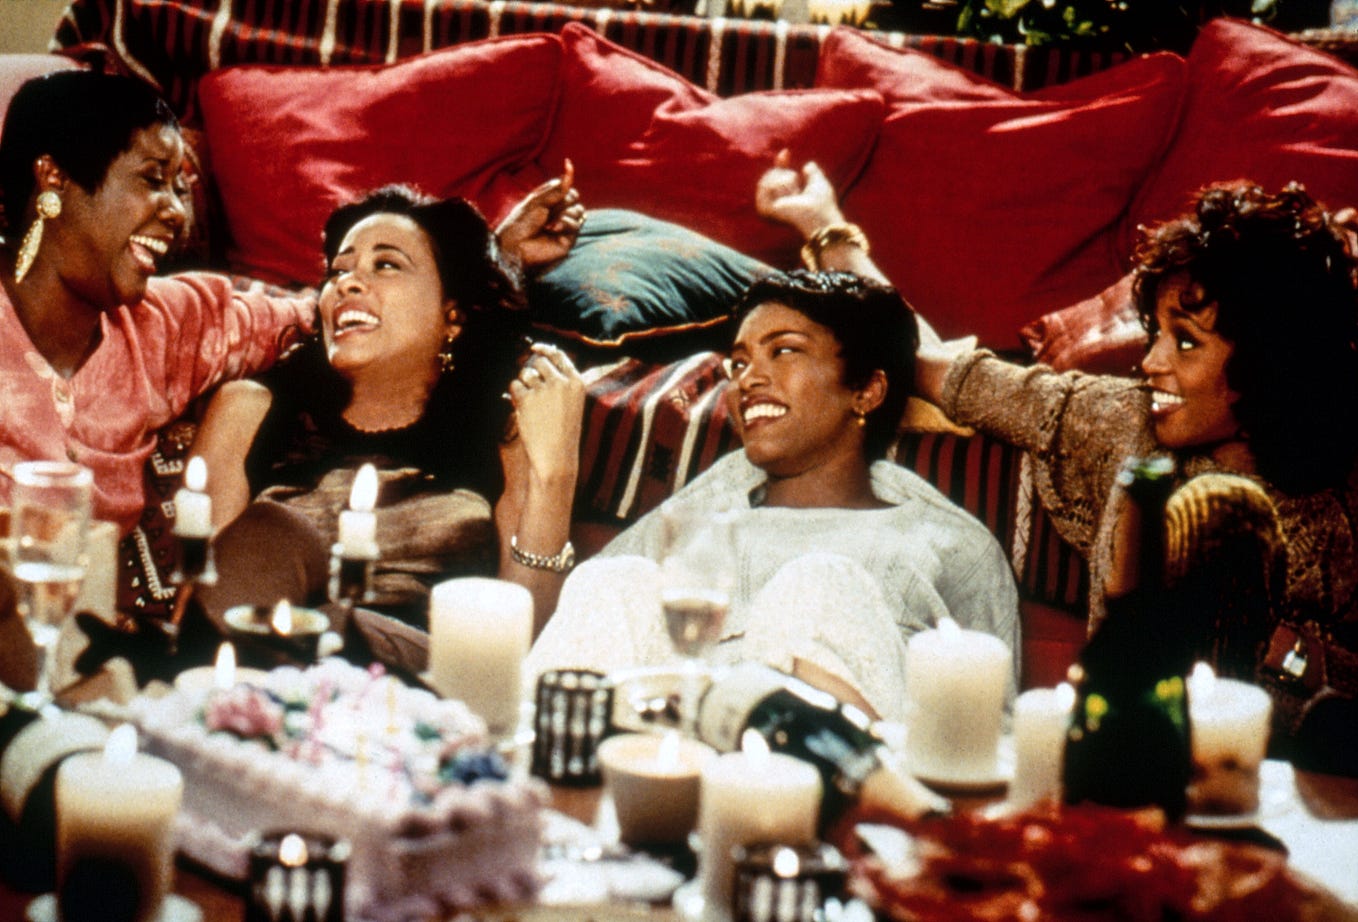 An Oral History of ‘Waiting To Exhale’-Including Its Stars On ‘That Scene’